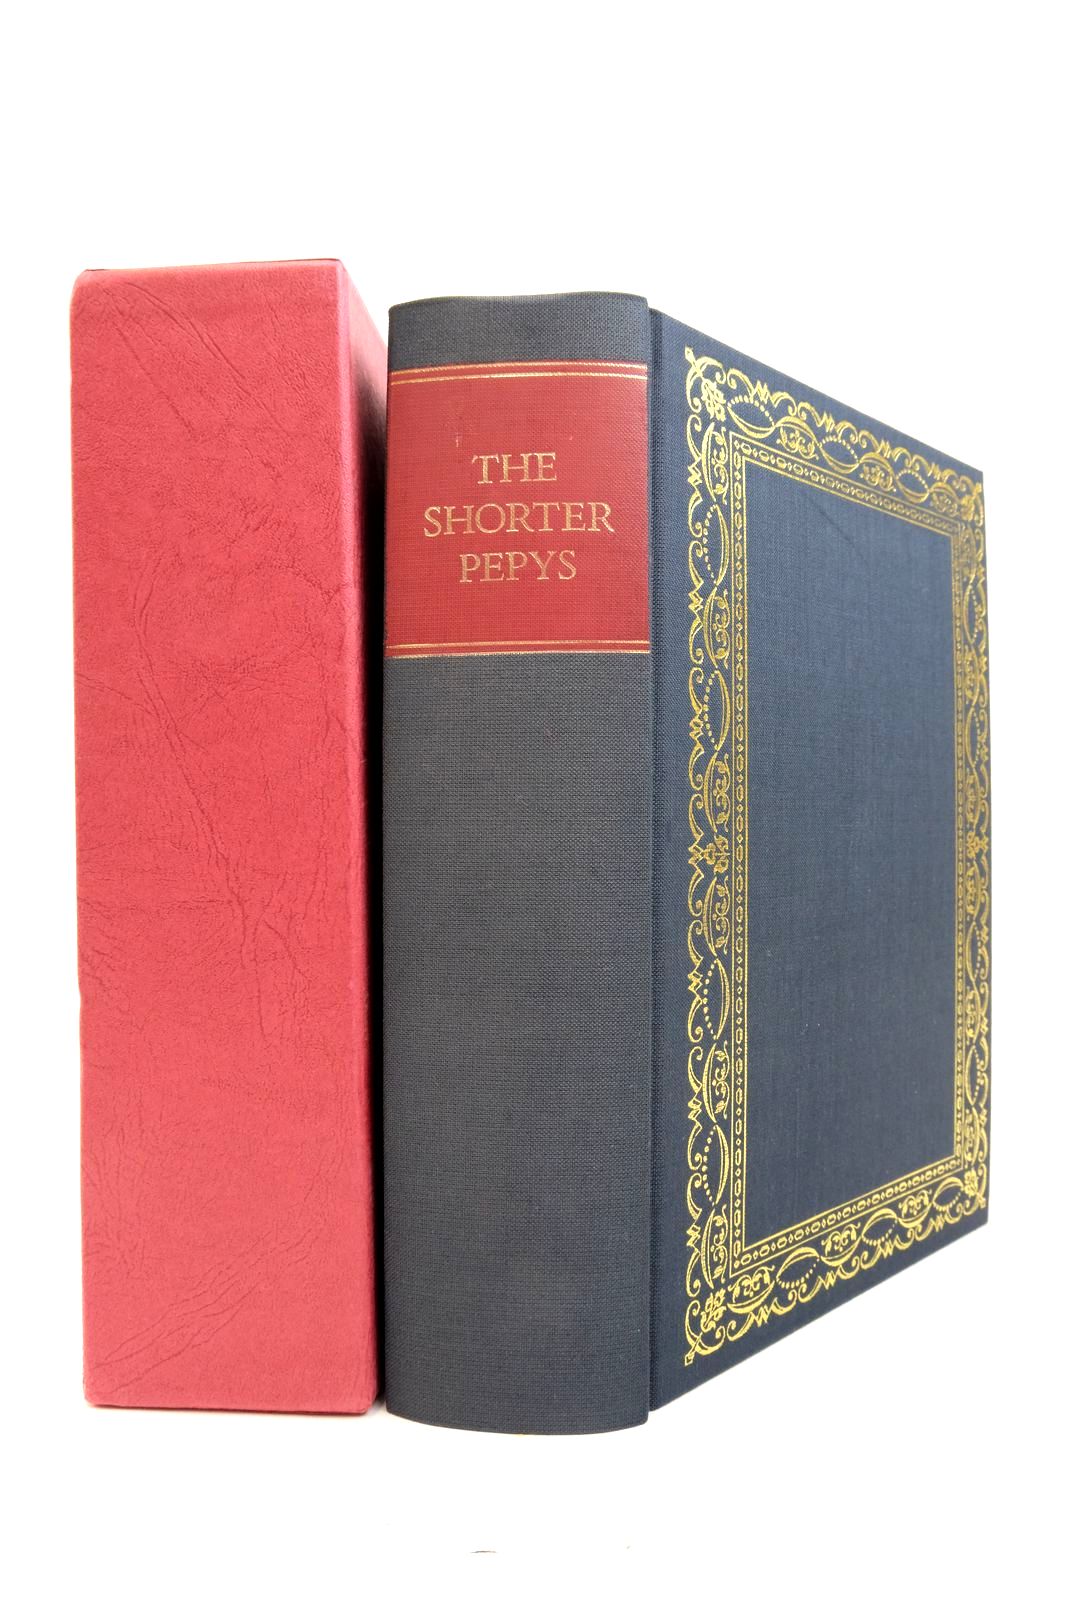 Photo of THE SHORTER PEPYS written by Pepys, Samuel Latham, Robert published by Folio Society (STOCK CODE: 2137330)  for sale by Stella & Rose's Books